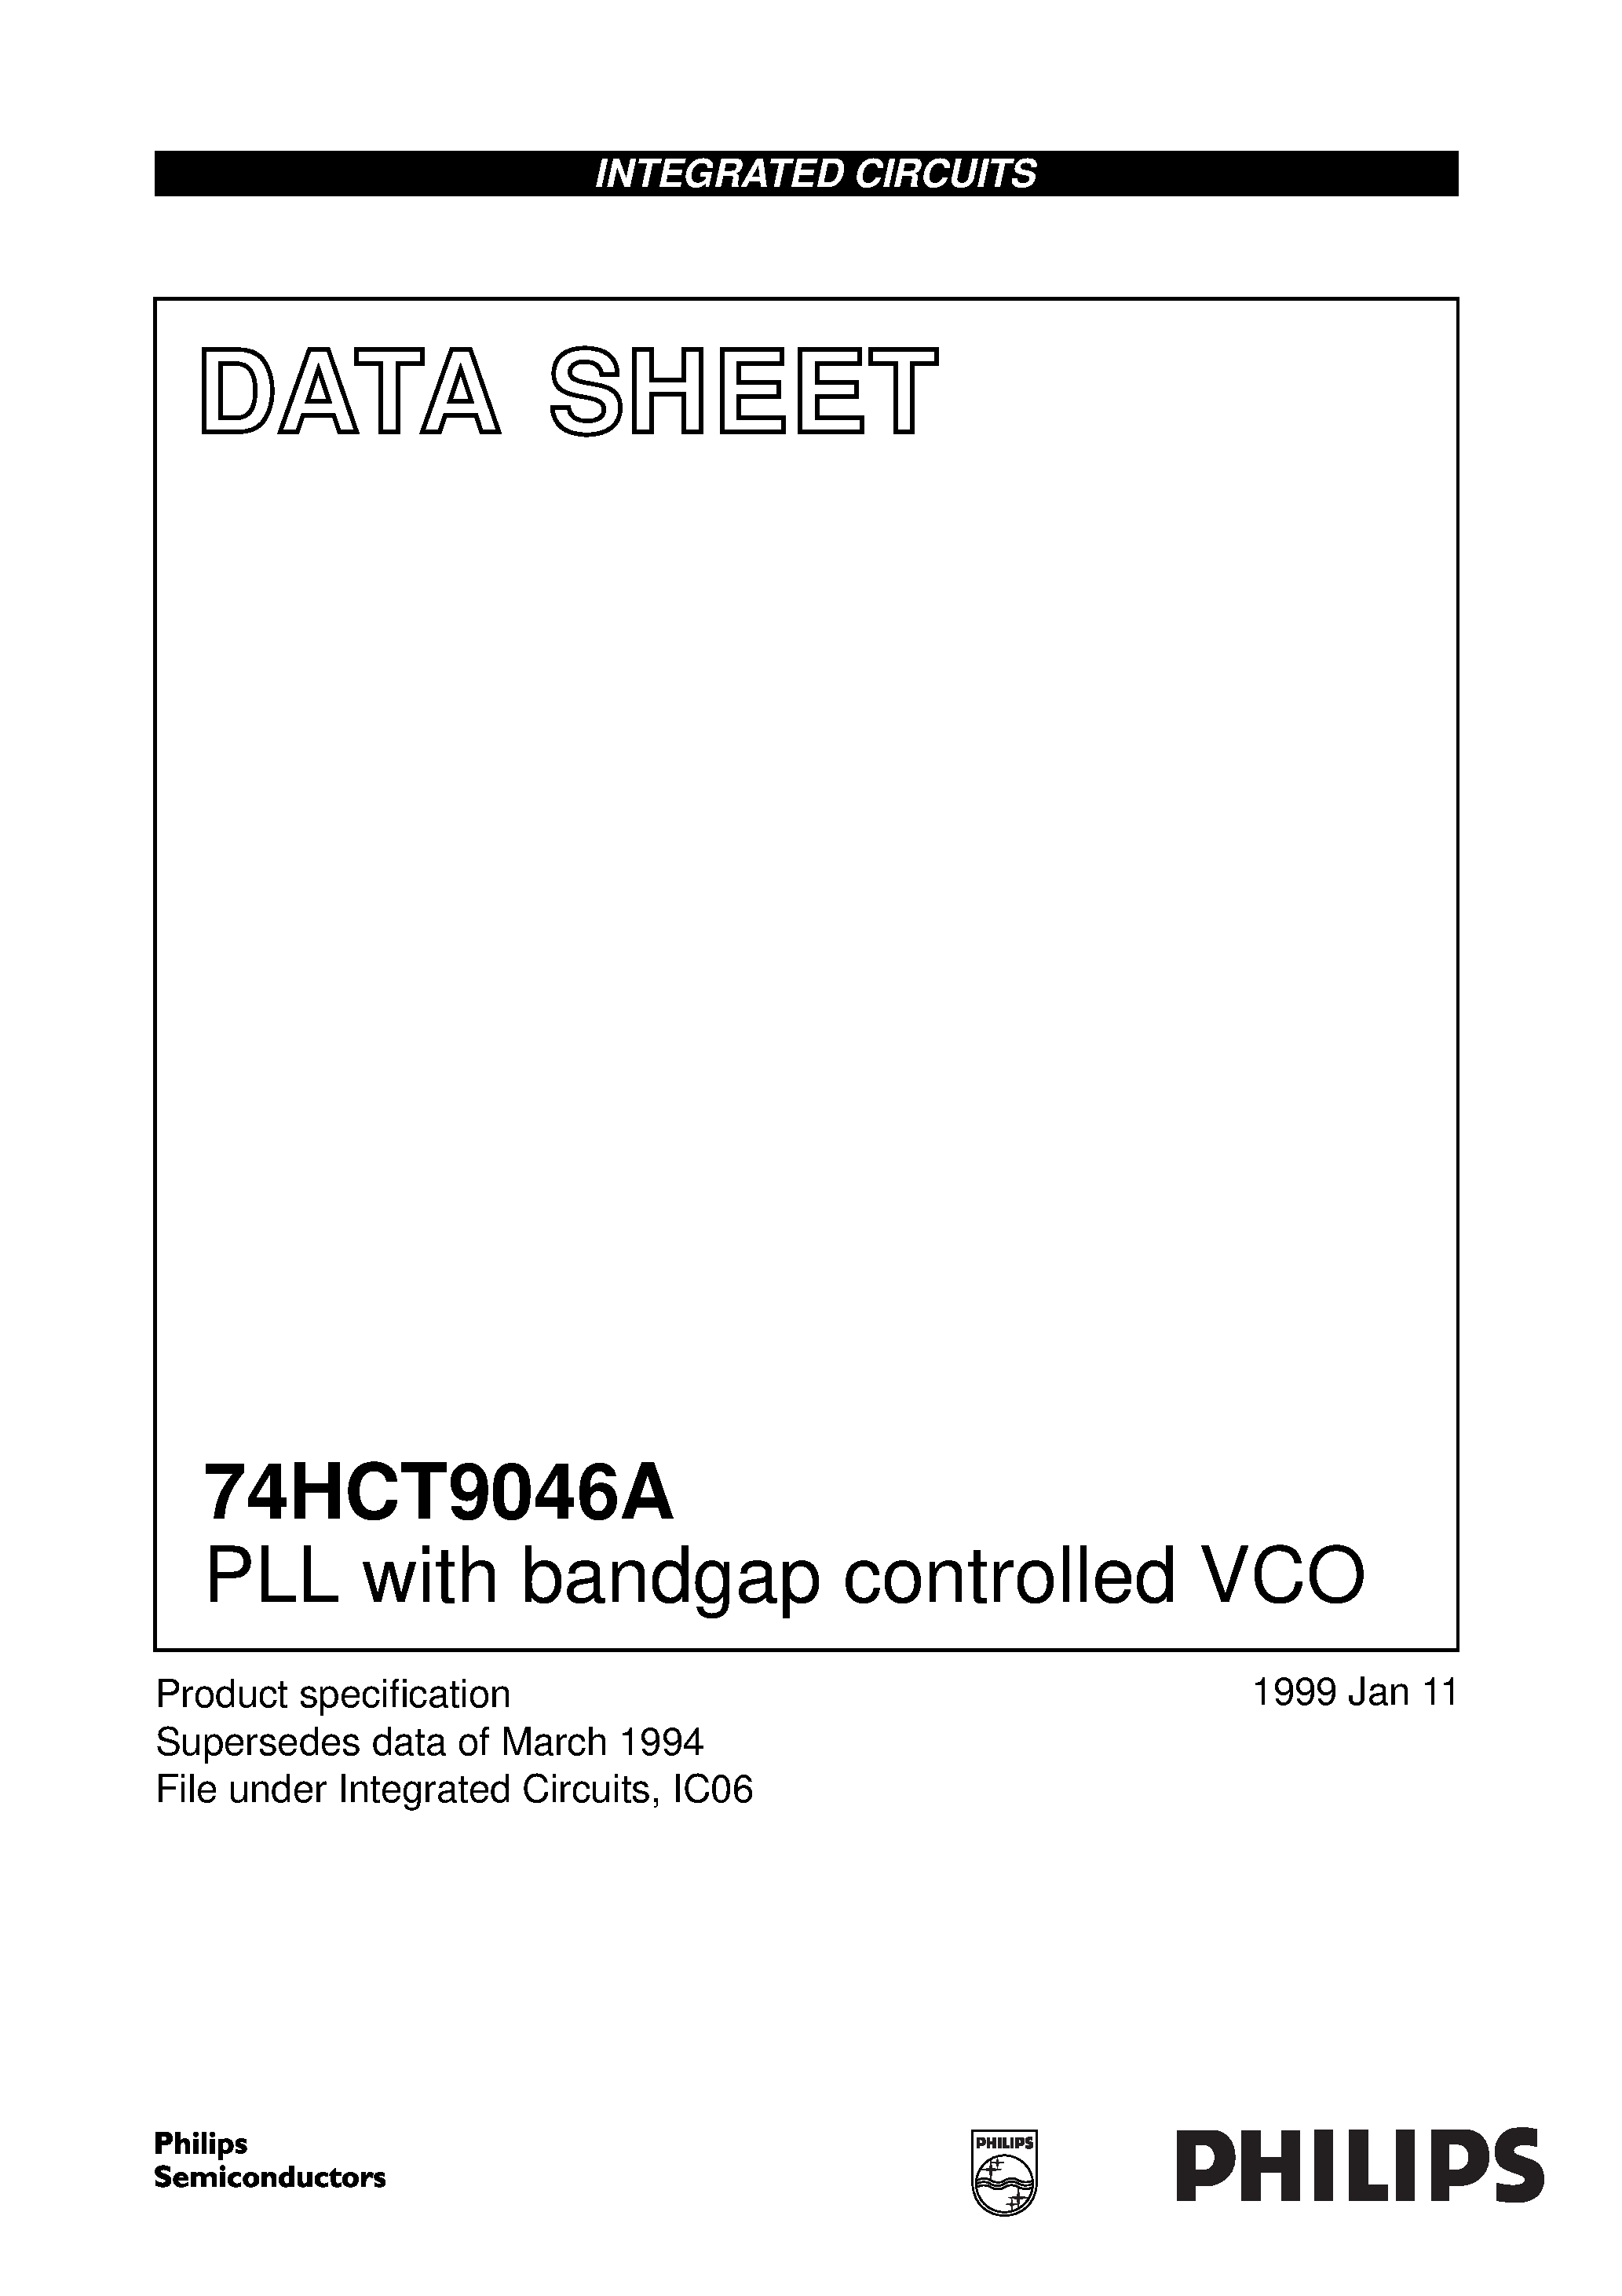 Datasheet 74HCT9046A - PLL with bandgap controlled VCO page 1